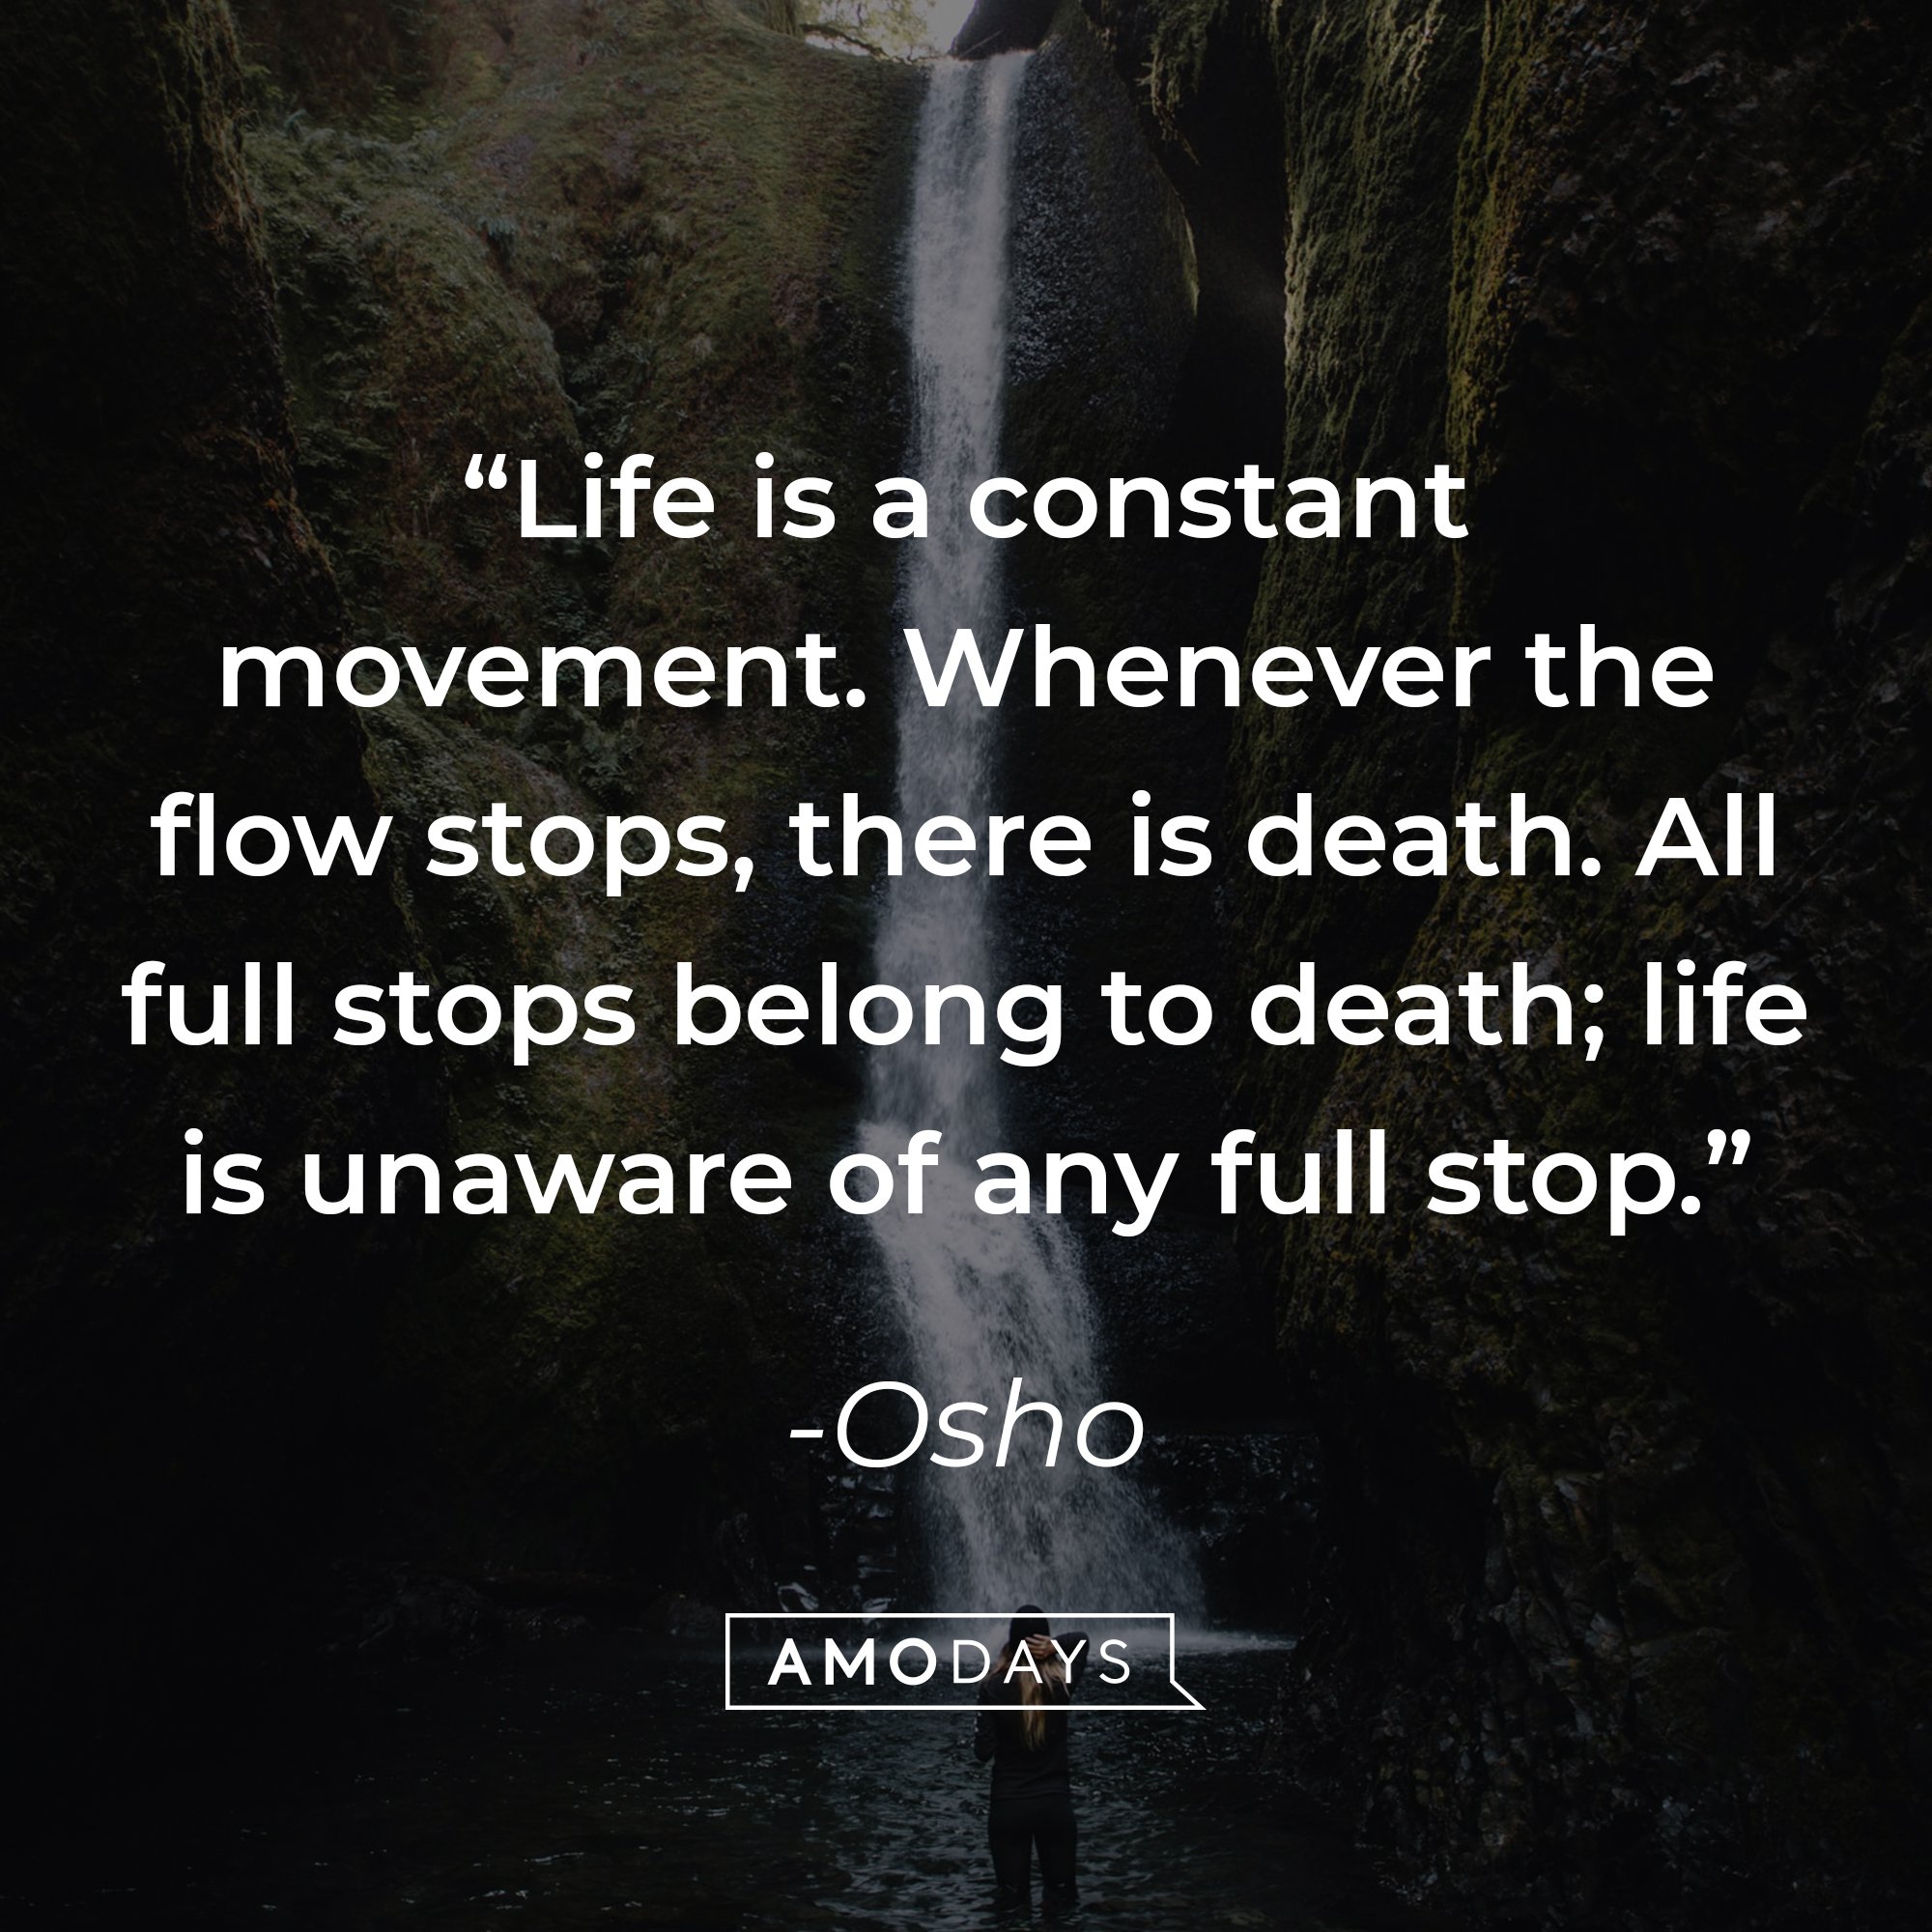 Osho's quote: "Life is a constant movement. Whenever the flow stops, there is death. All full stops belong to death; life is unaware of any full stop." | Image: AmoDays